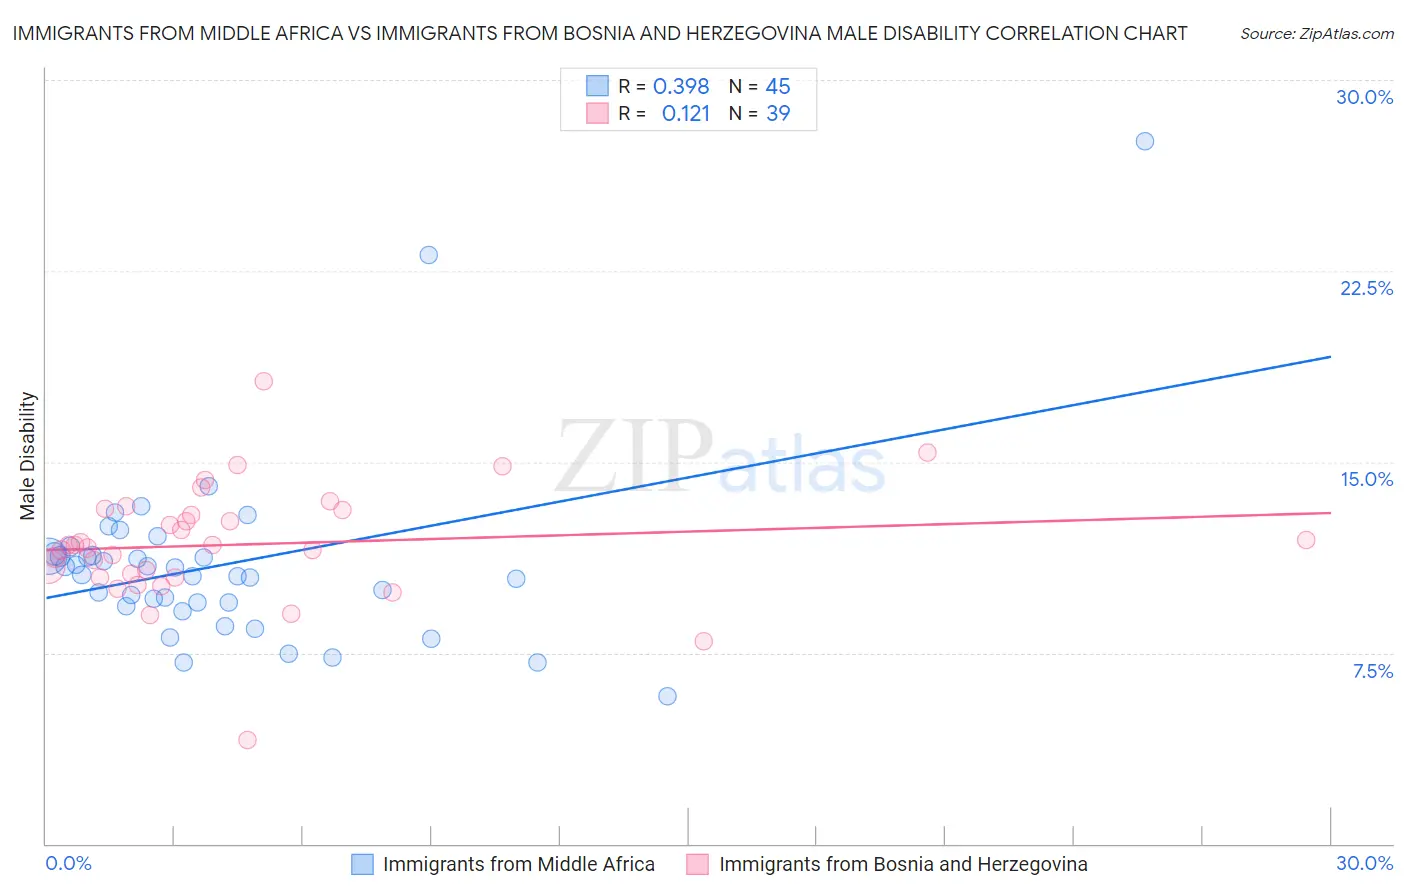 Immigrants from Middle Africa vs Immigrants from Bosnia and Herzegovina Male Disability